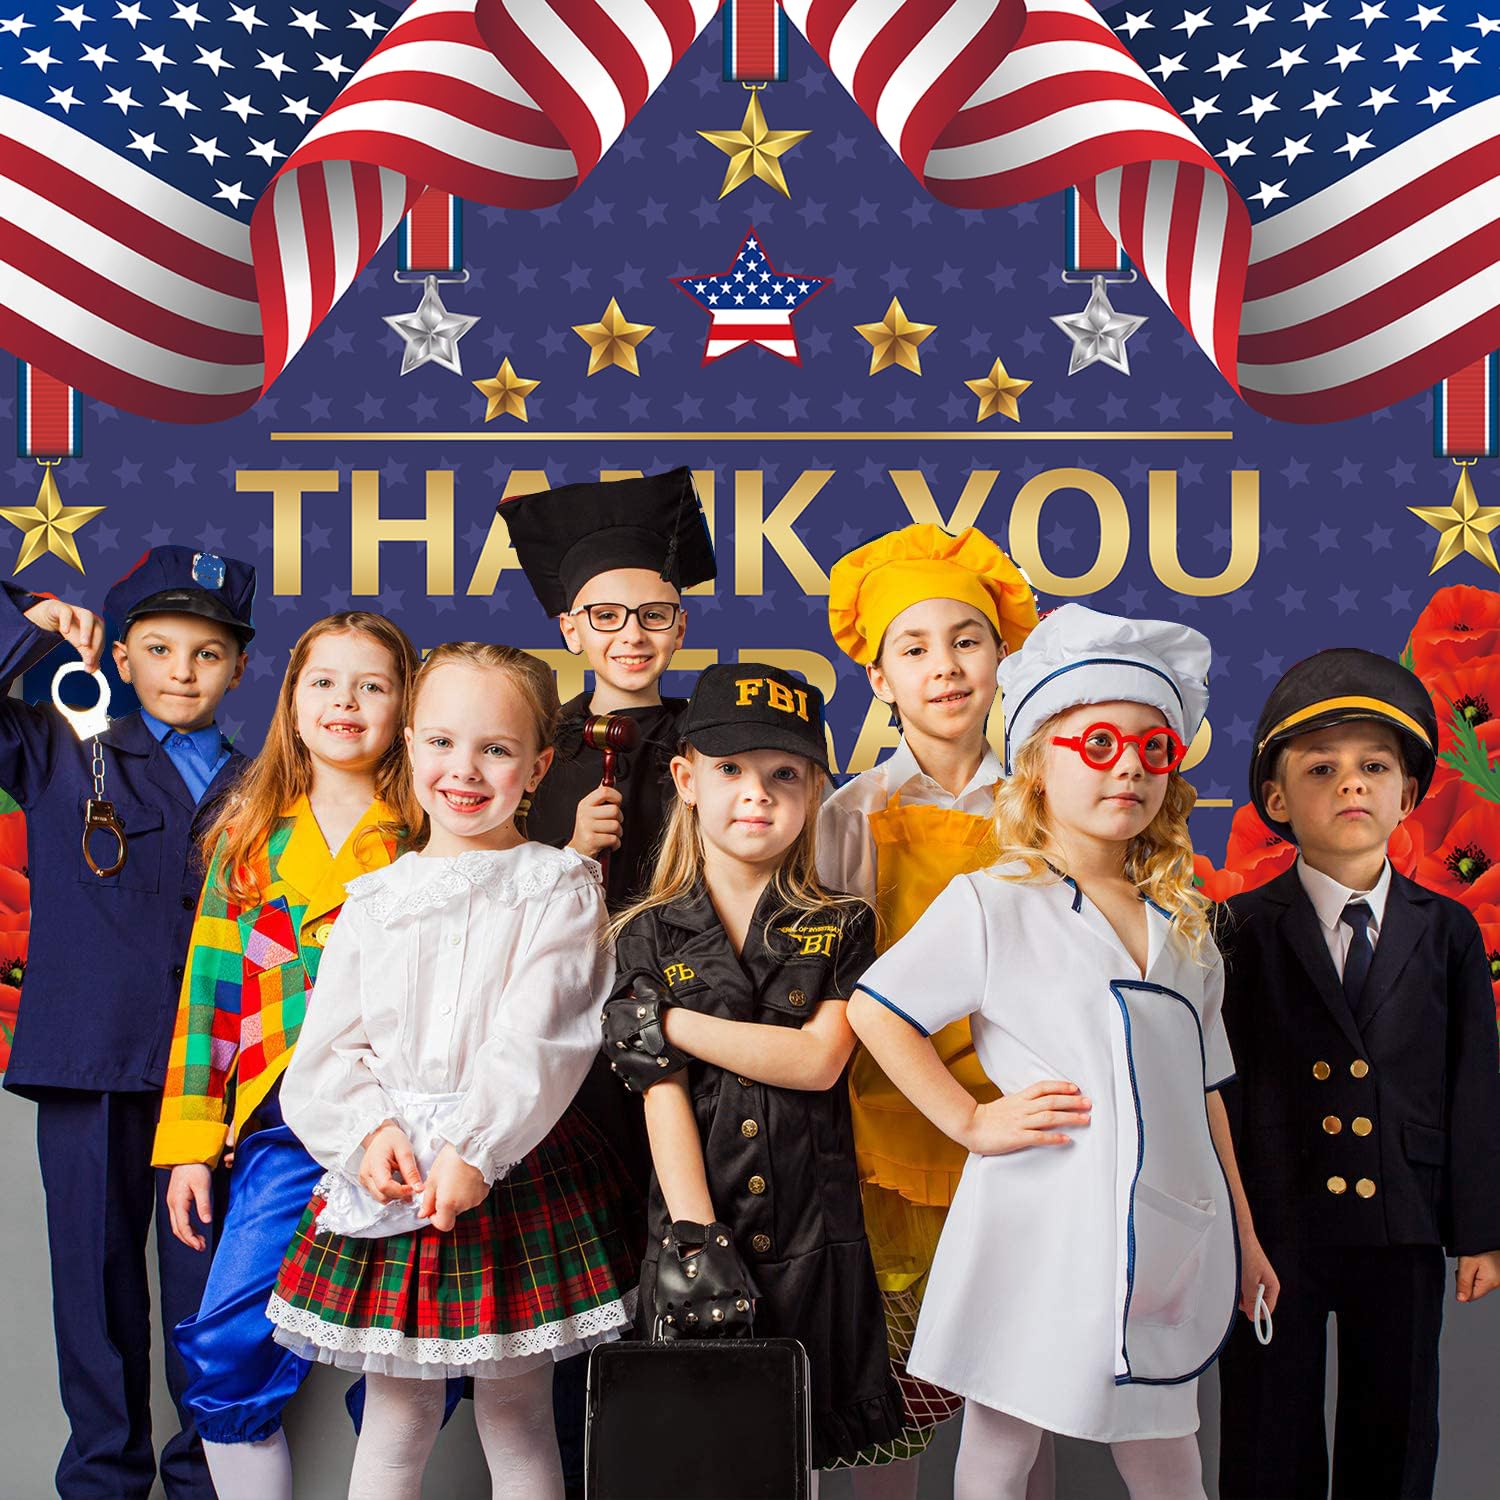 Thank You Veterans Photography Backdrop Banner Patriotic Memorial Day Background for Greeting Military Army Heroes Theme Party Supplies Photo Booth Props Decoration (7X5FT)